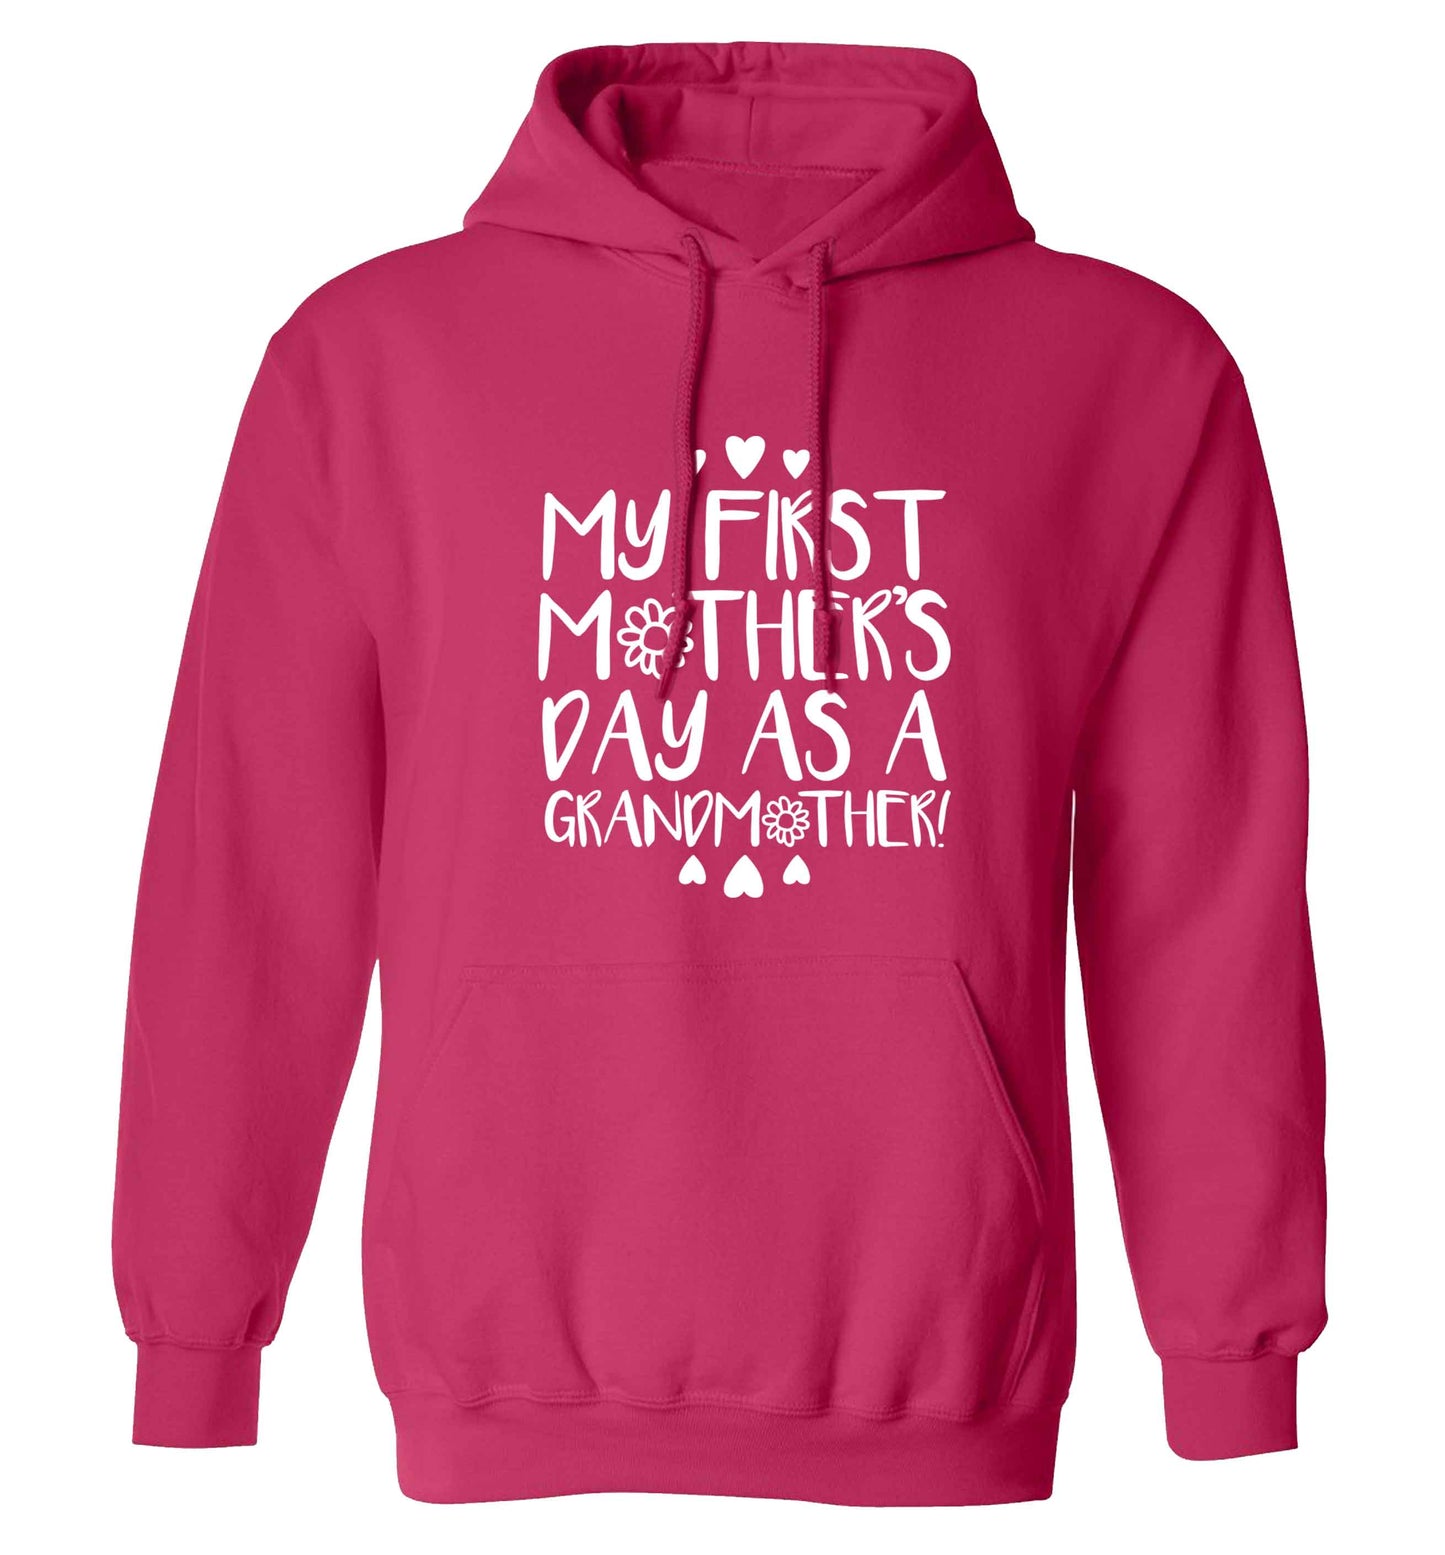 It's my first mother's day as a grandmother adults unisex pink hoodie 2XL